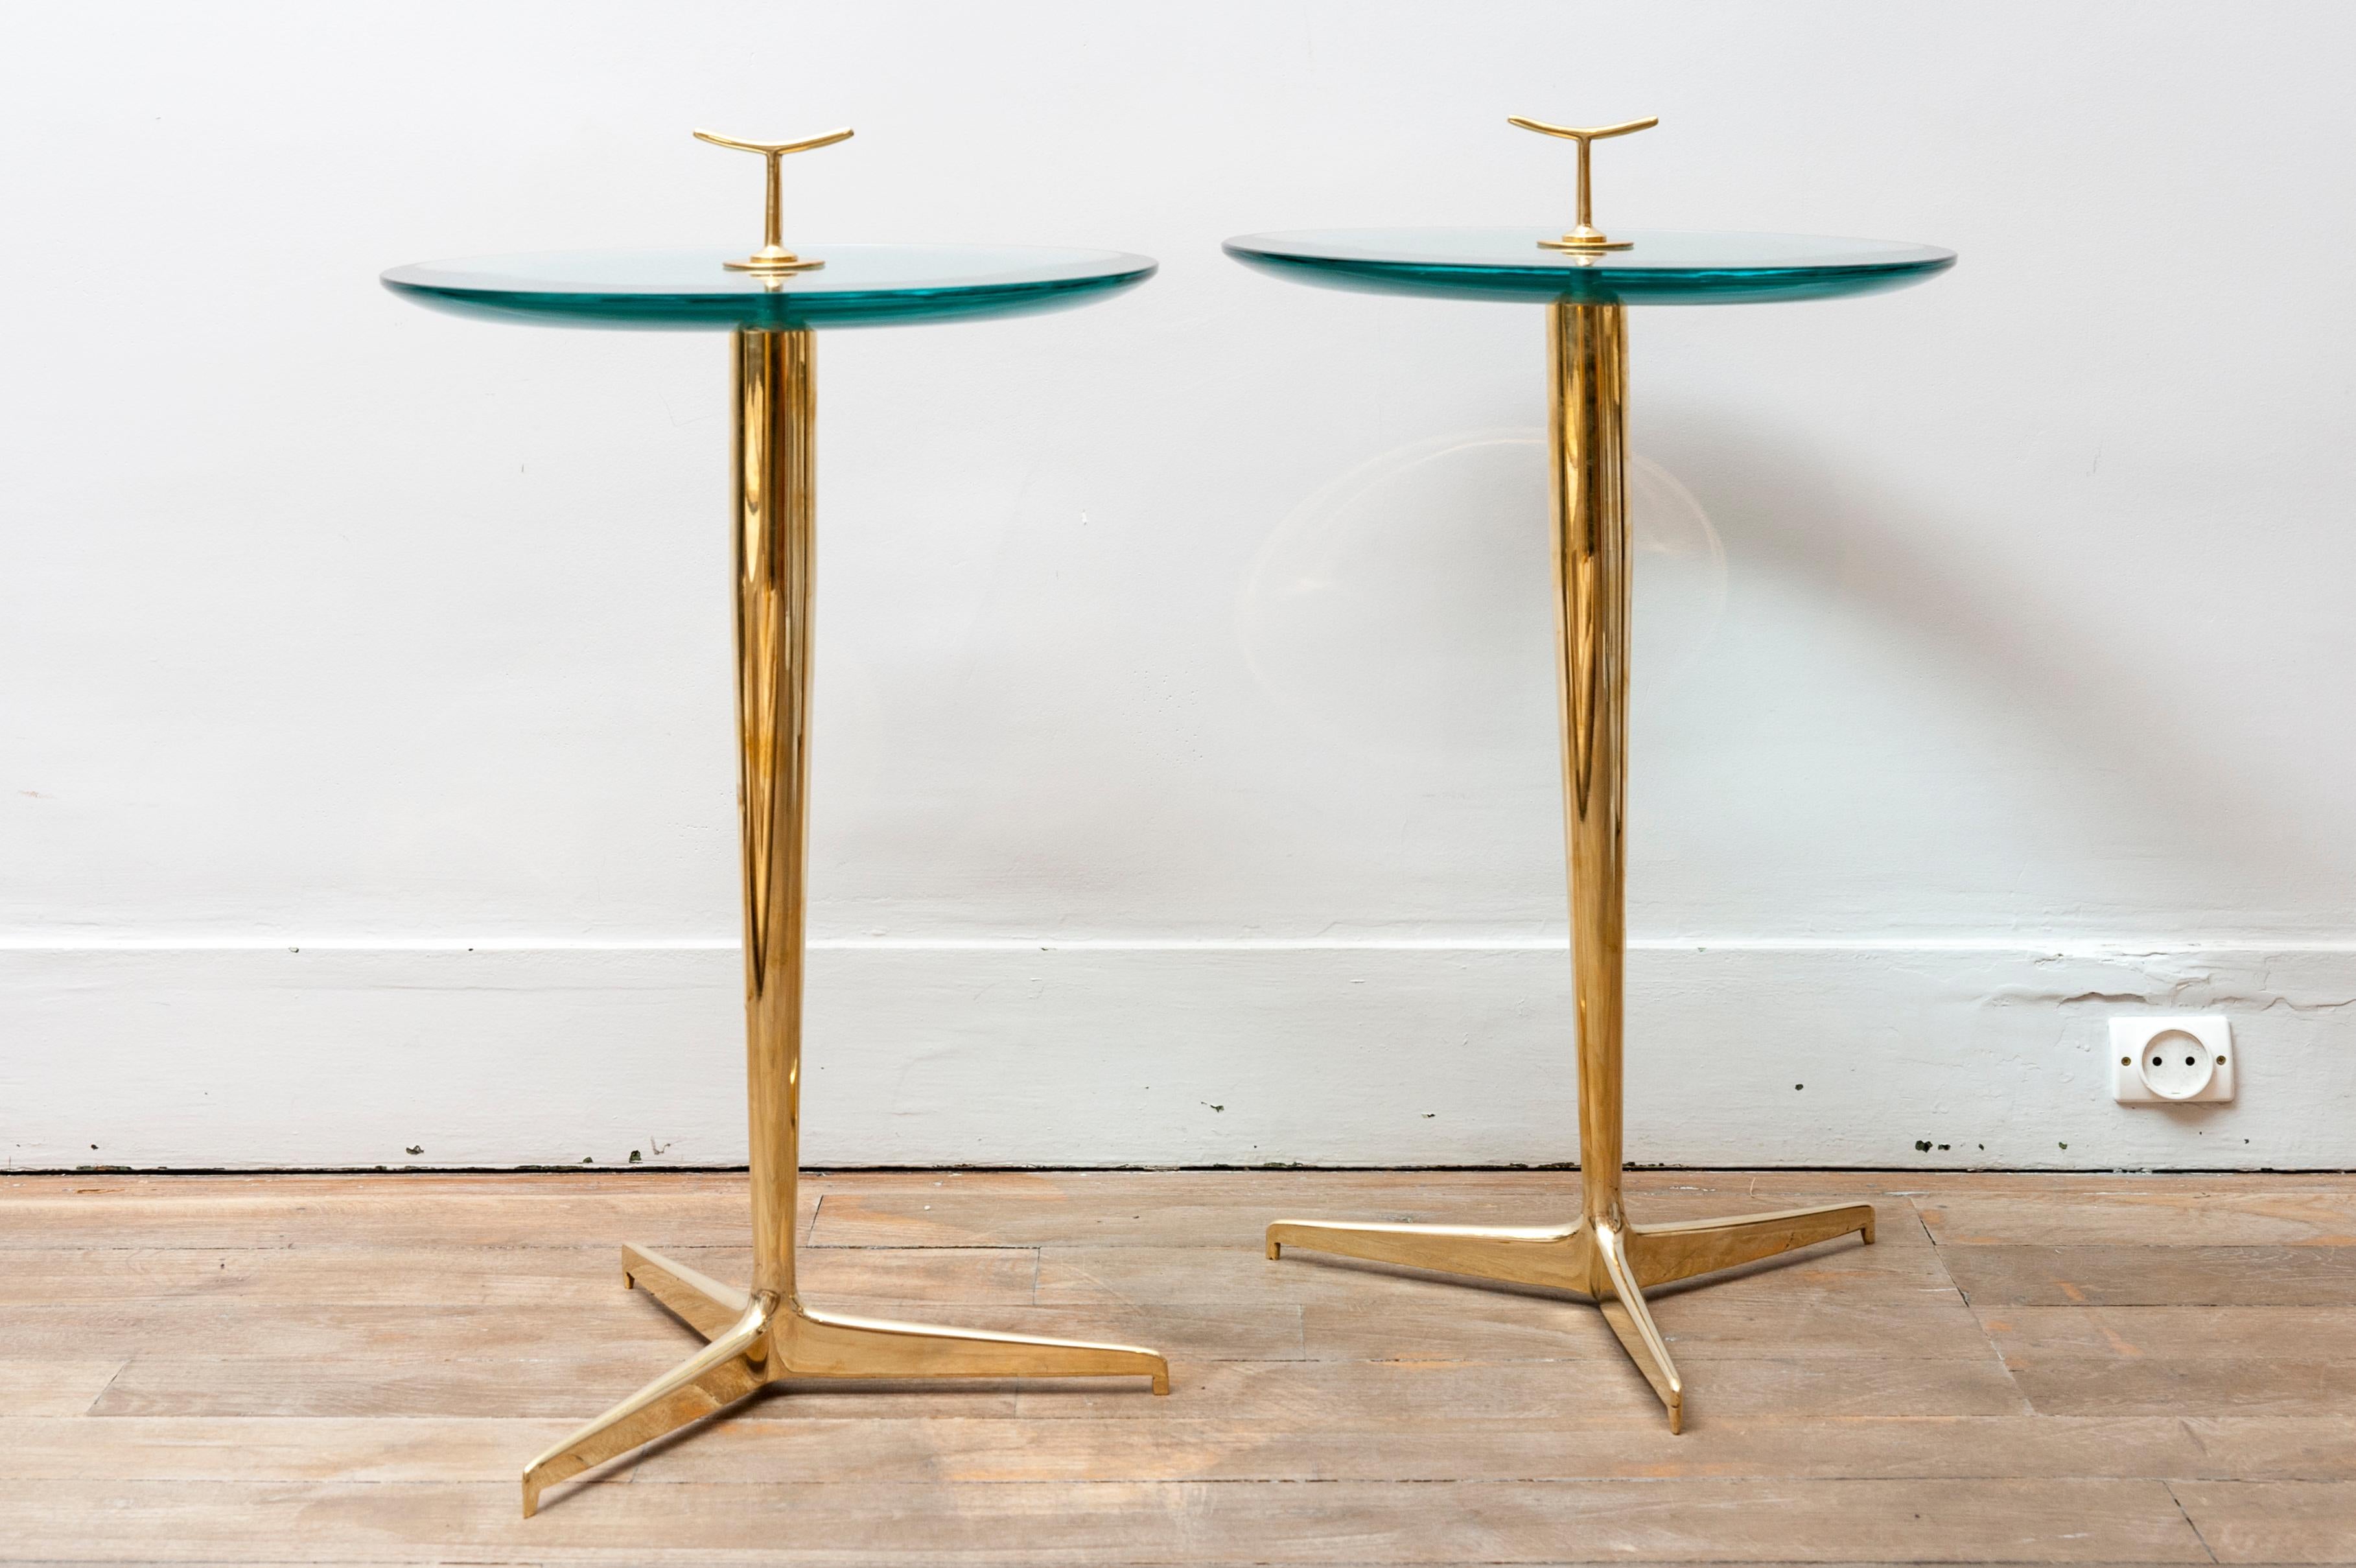 Elegant pair of side tables in the style of Fontana Arte
Brass and thick lens effect glass
Italy, circa 2000.
Measures: Height including the handle: 65 cm
Tray height 58 cm.